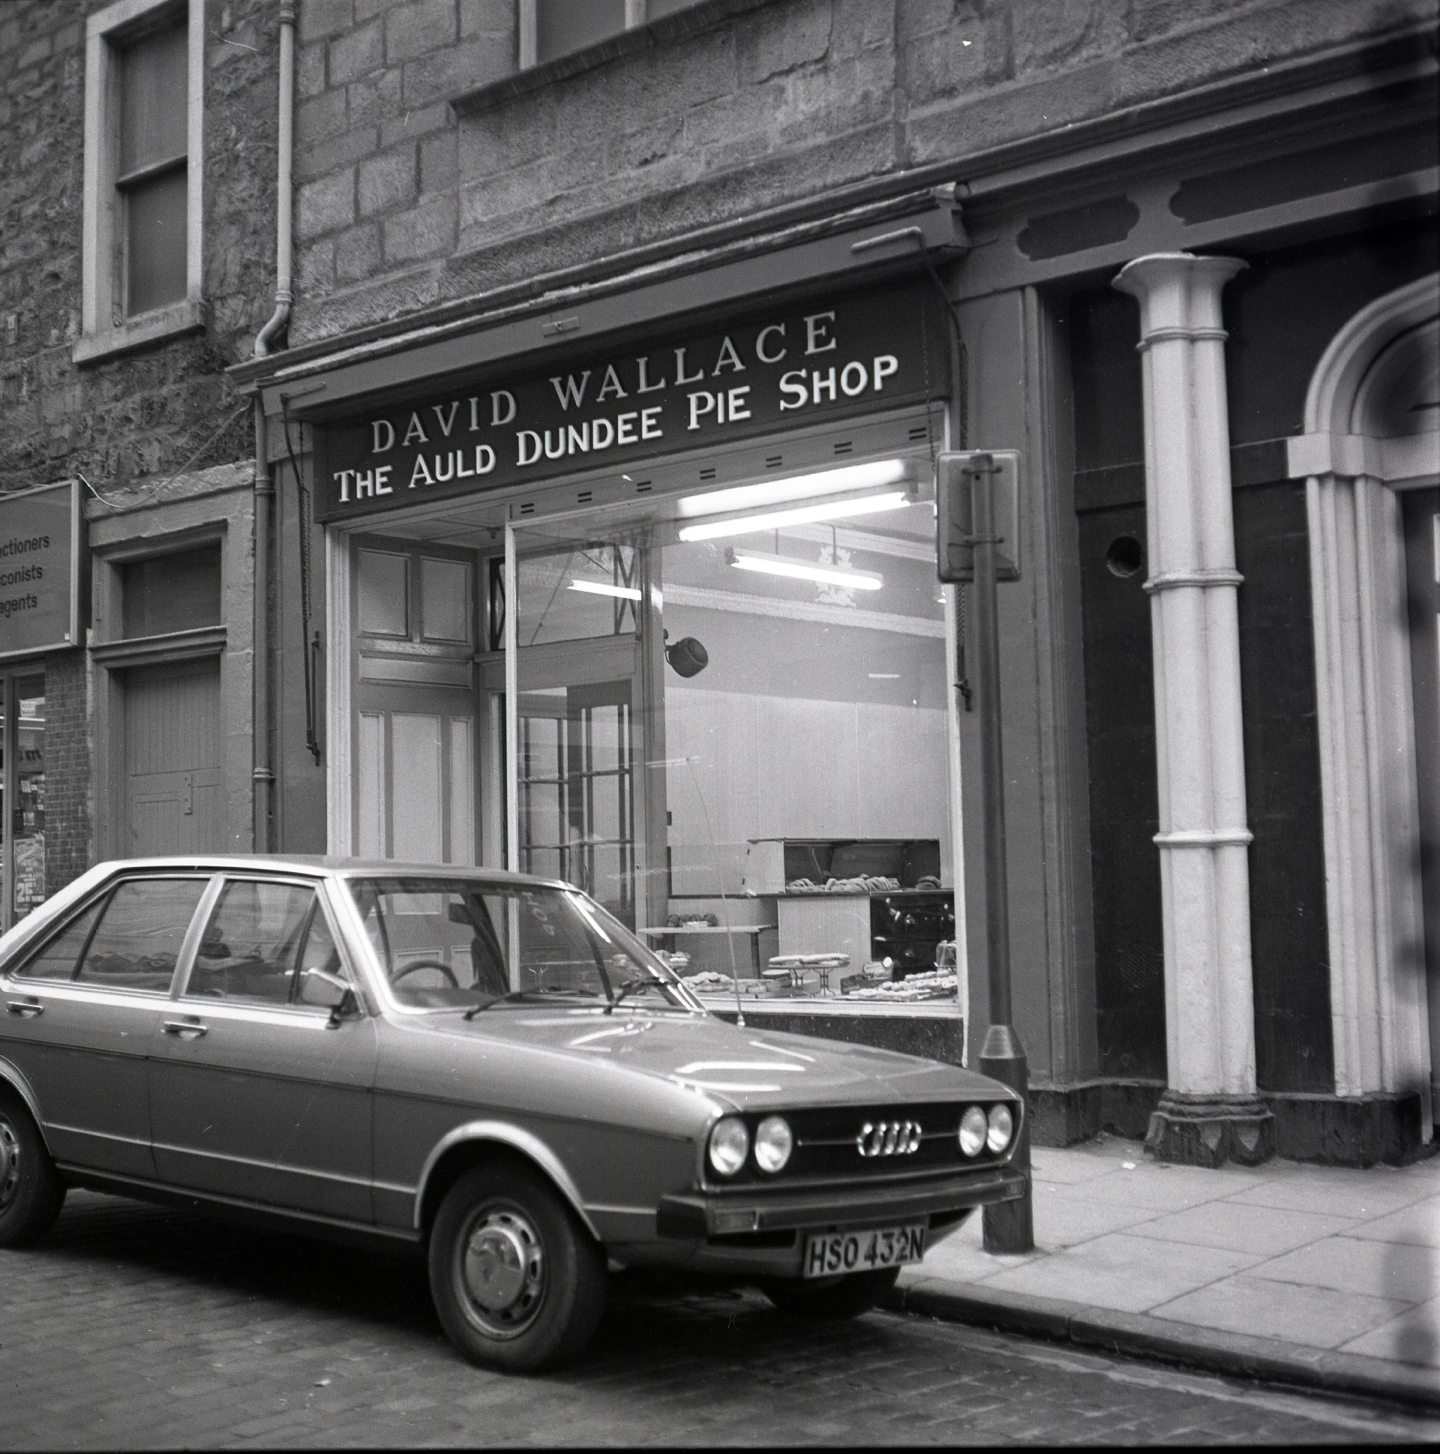 The Auld Dundee Pie Shop at Castle Street in 1977. Image: DC Thomson.